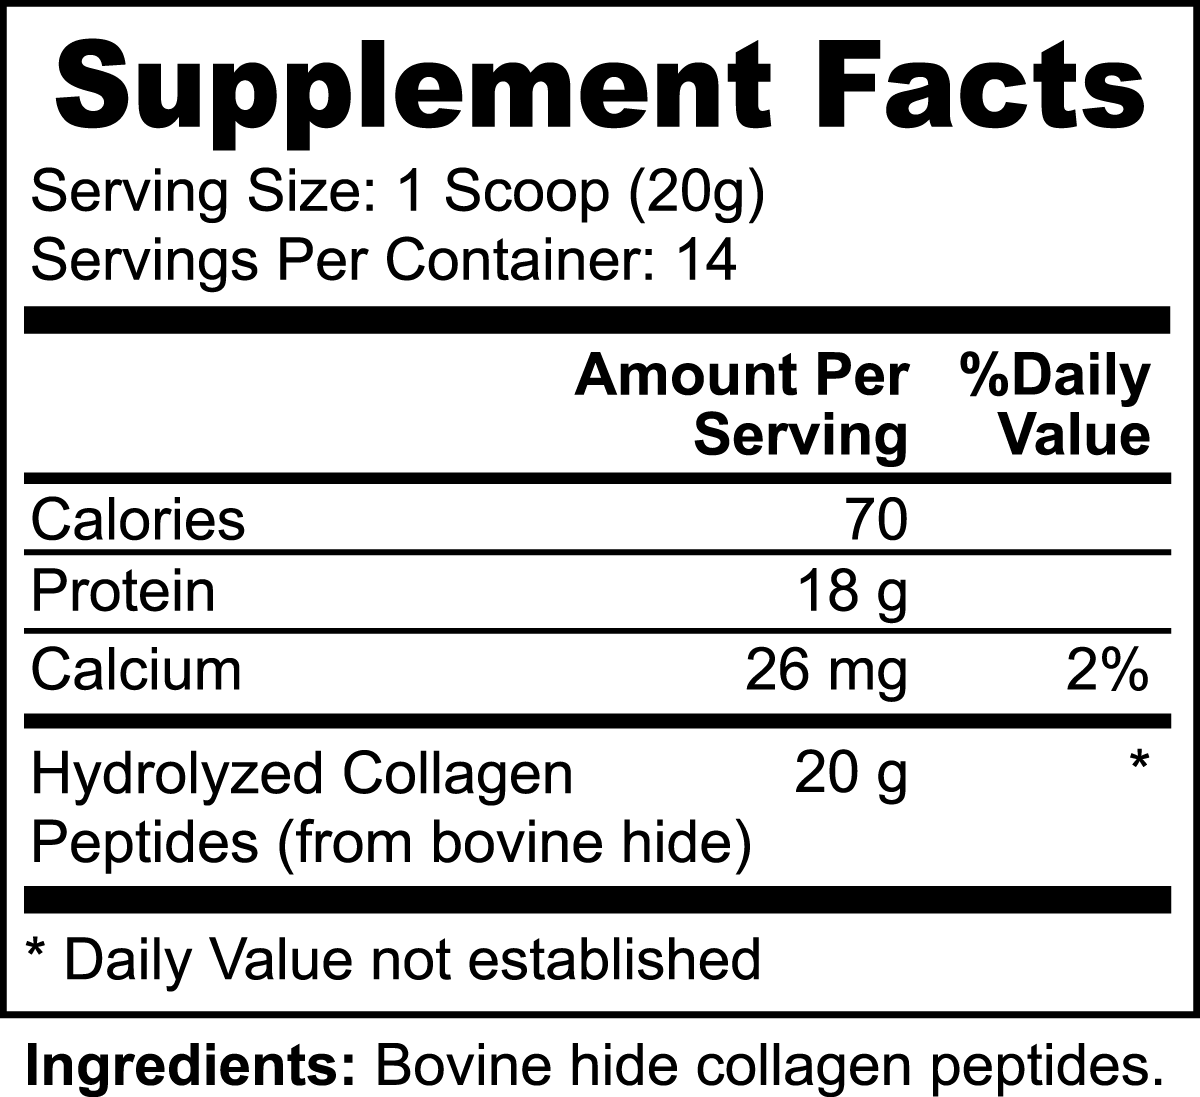 Grass-Fed Hydrolyzed Collagen Peptides 0.62 lb Fem Tape Vitamins & Supplements